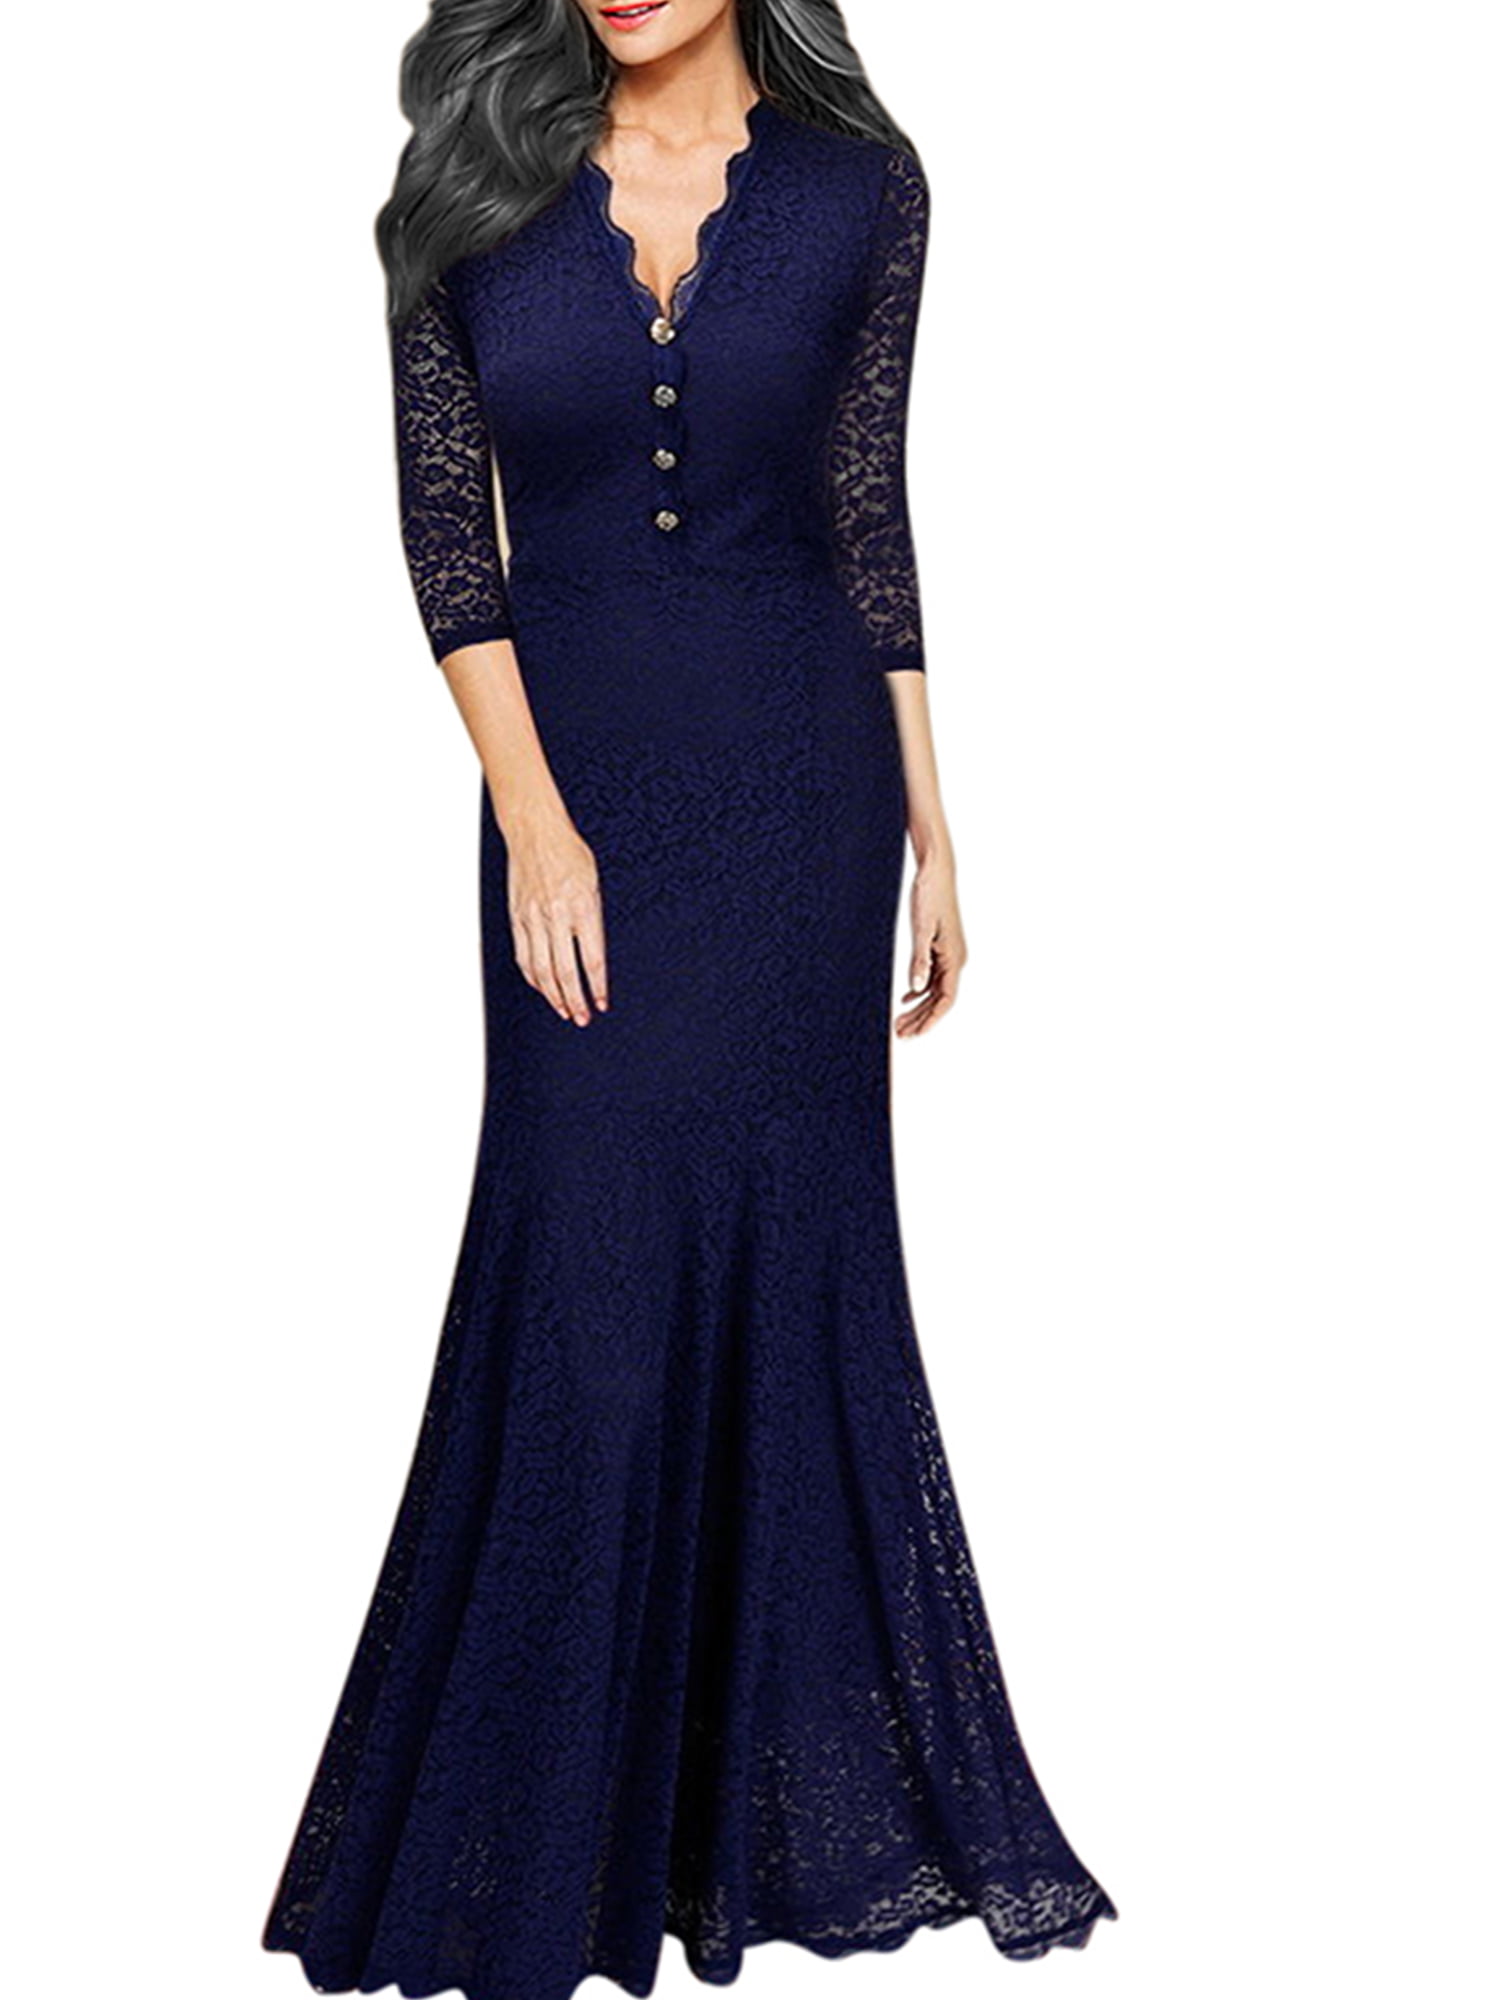 Women V Neck Long Dress Sleeve Cocktail Formal Ball Prom Gown Party Evening 